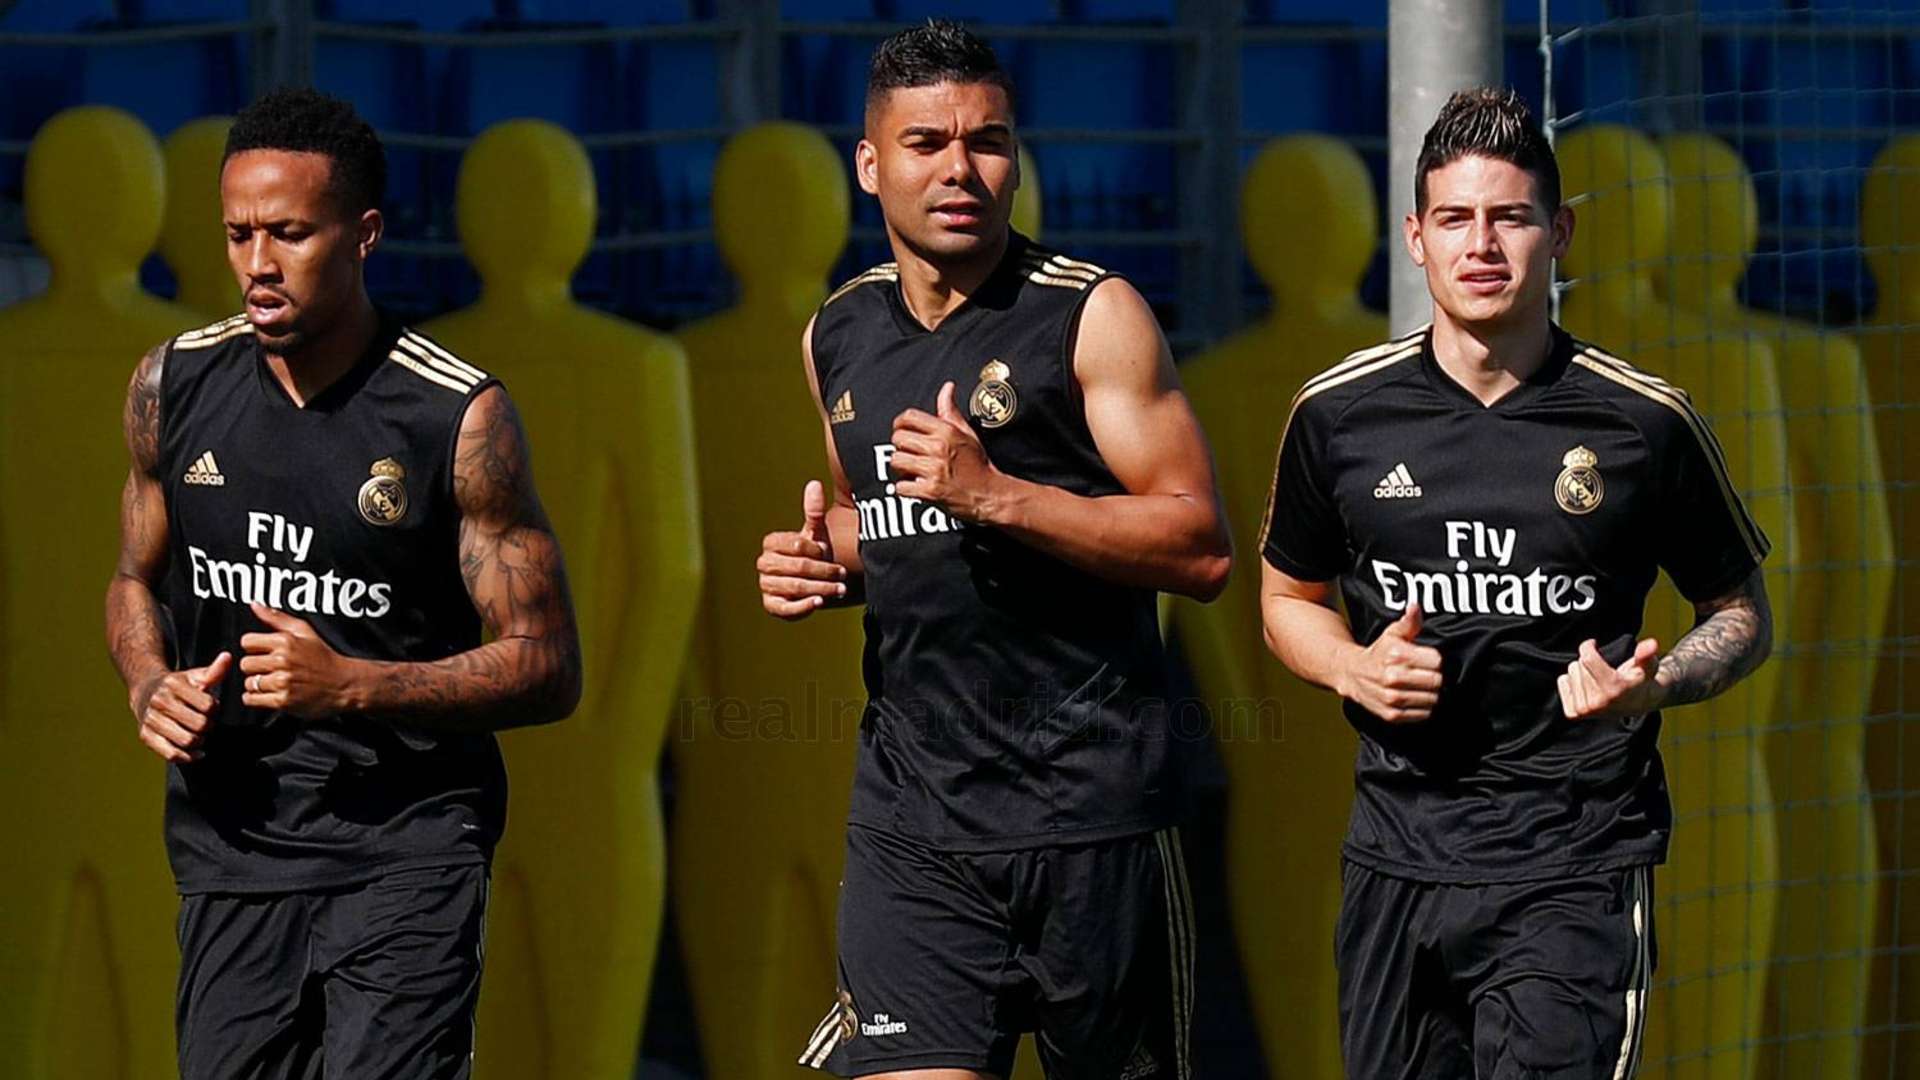 Eder Militao, Casemiro and James Rodríguez, during a Real Madrid training session